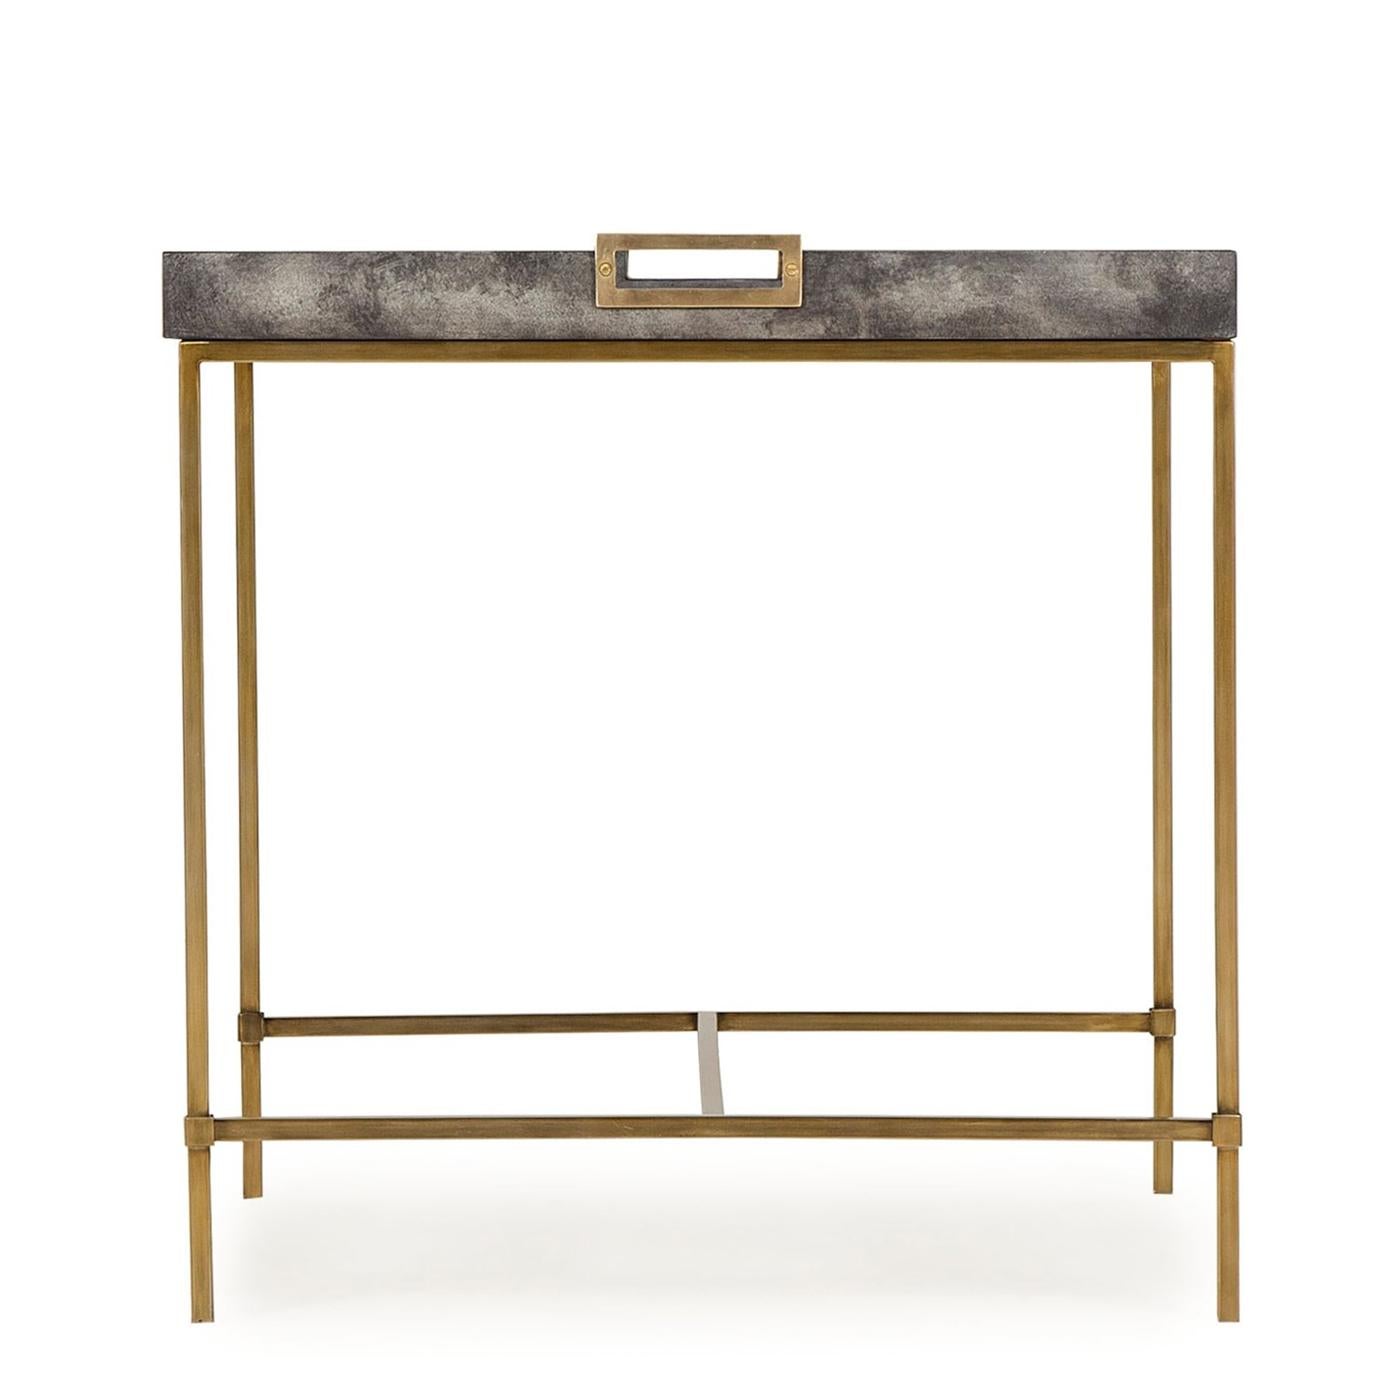 Painted Charcoal Grey Side Table with Brass Finish